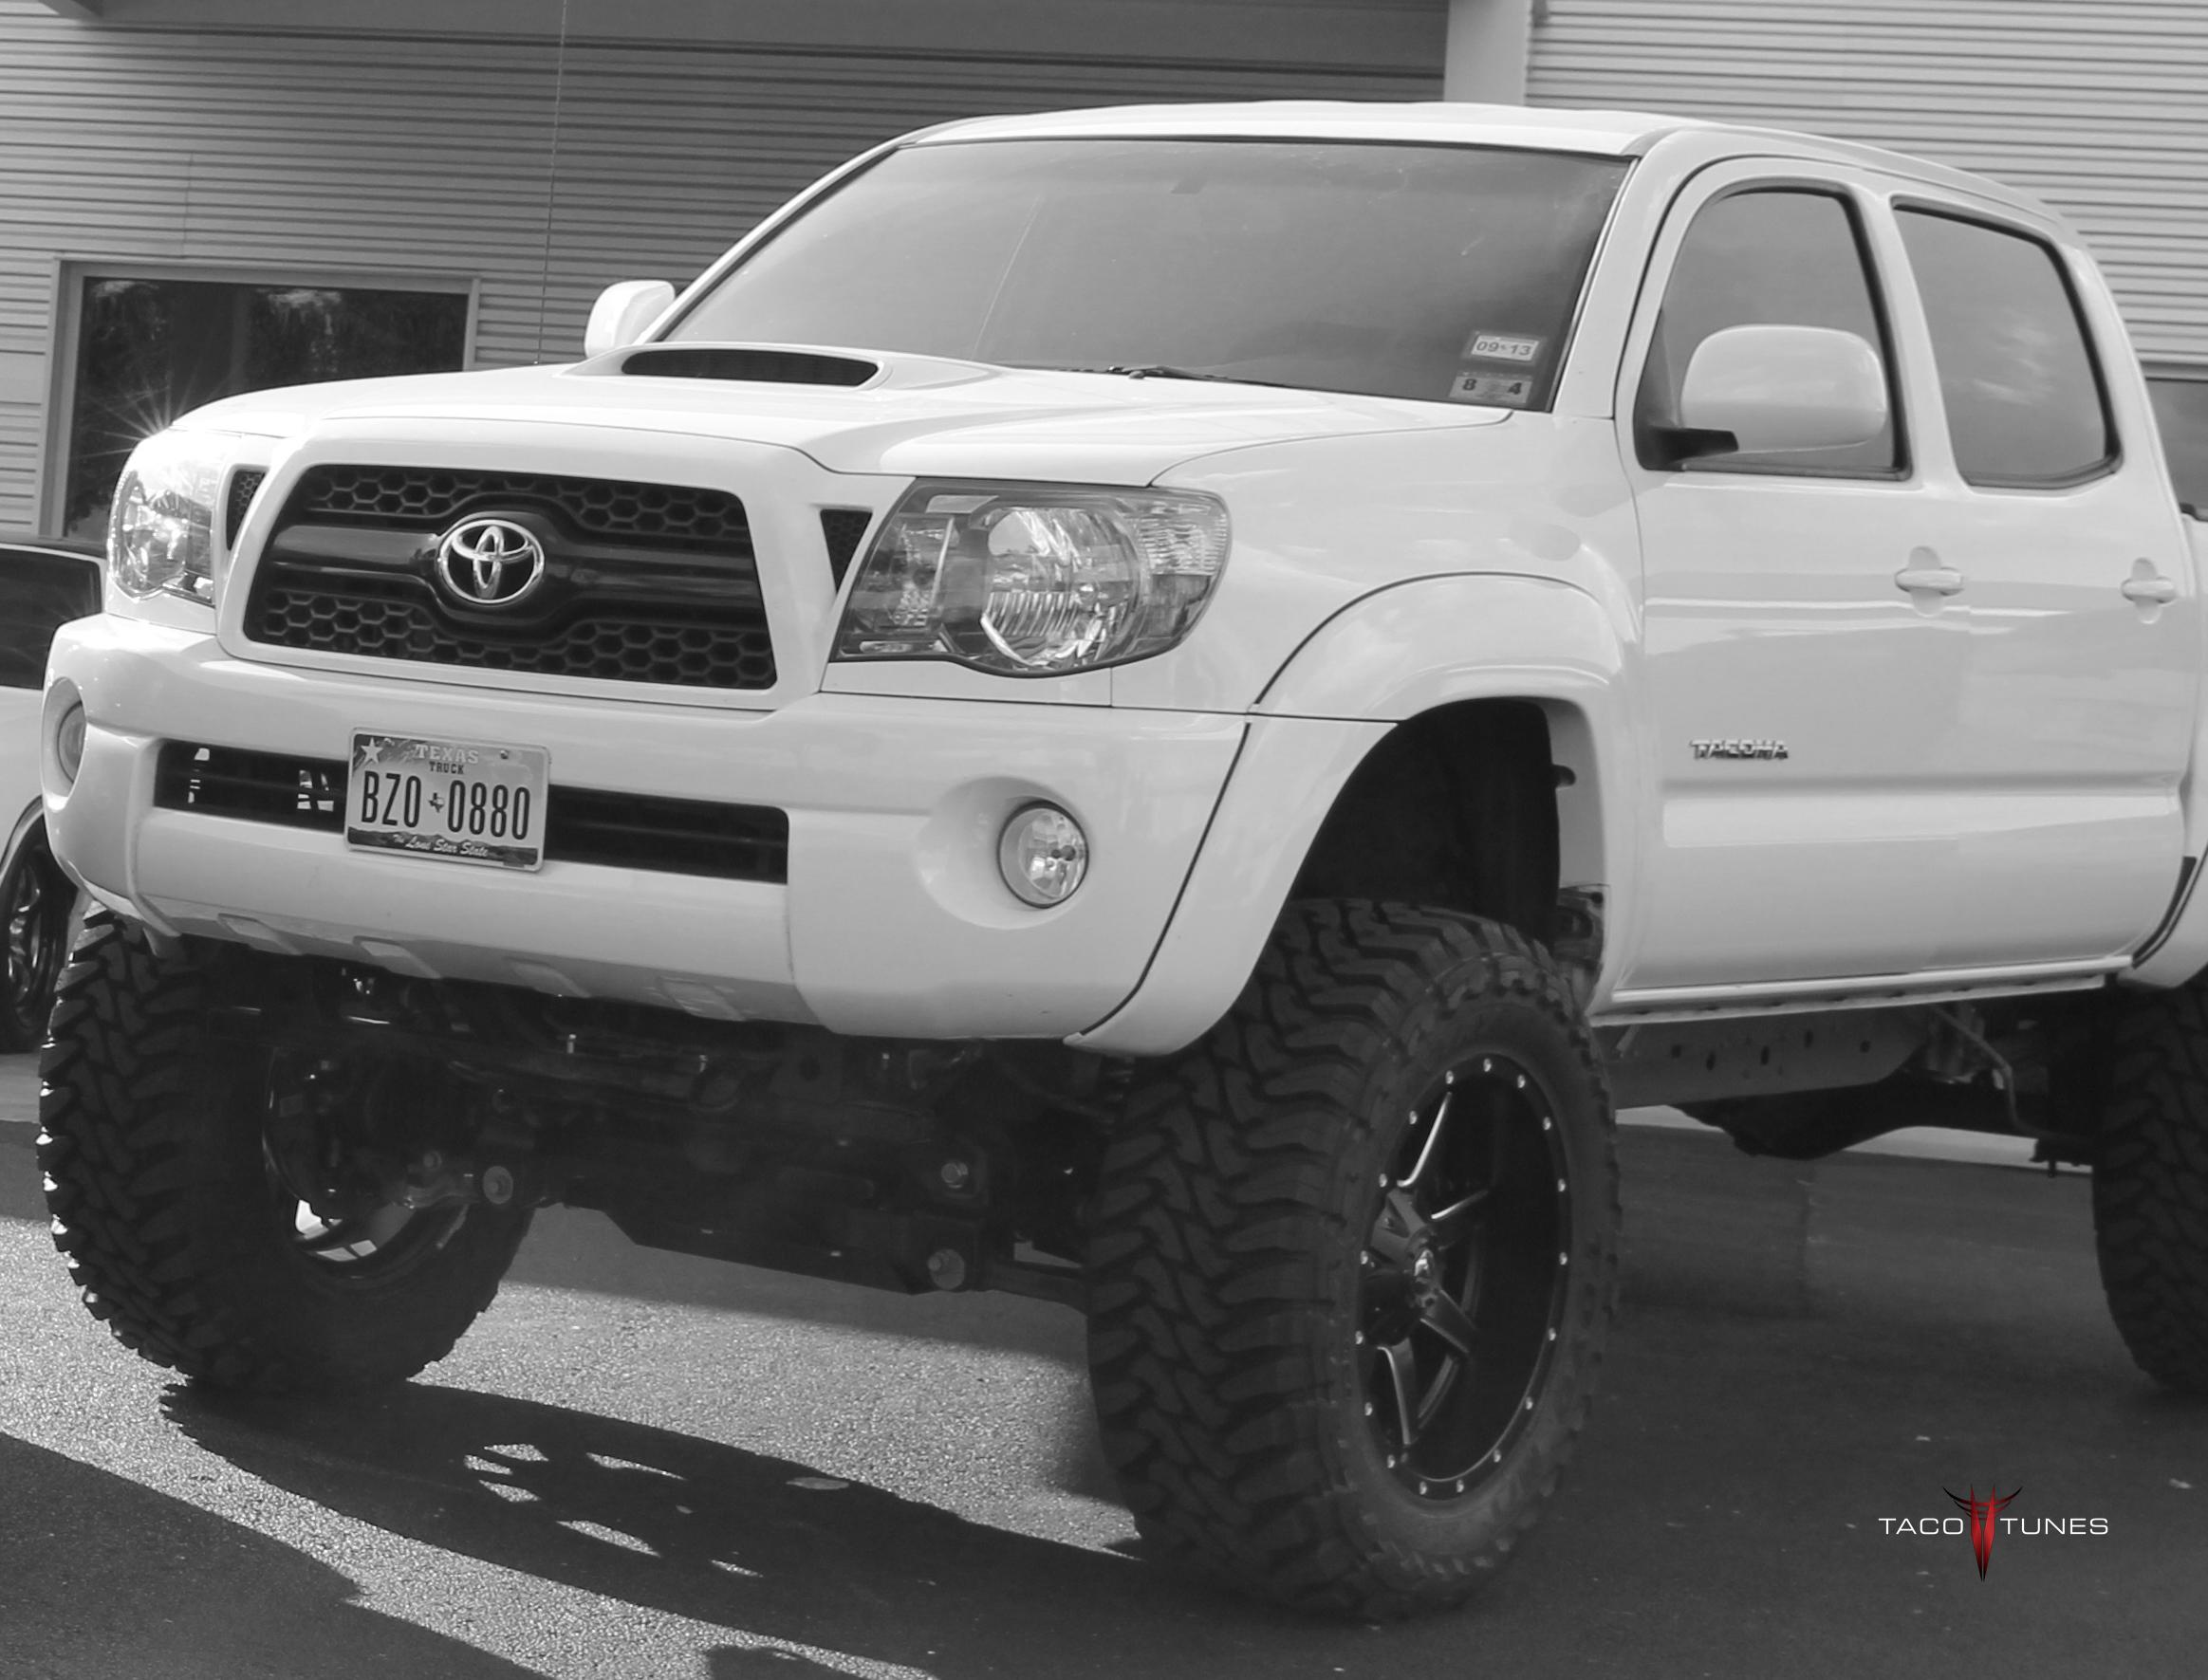 Discover 93+ about 2013 toyota tacoma lifted super cool - in.daotaonec